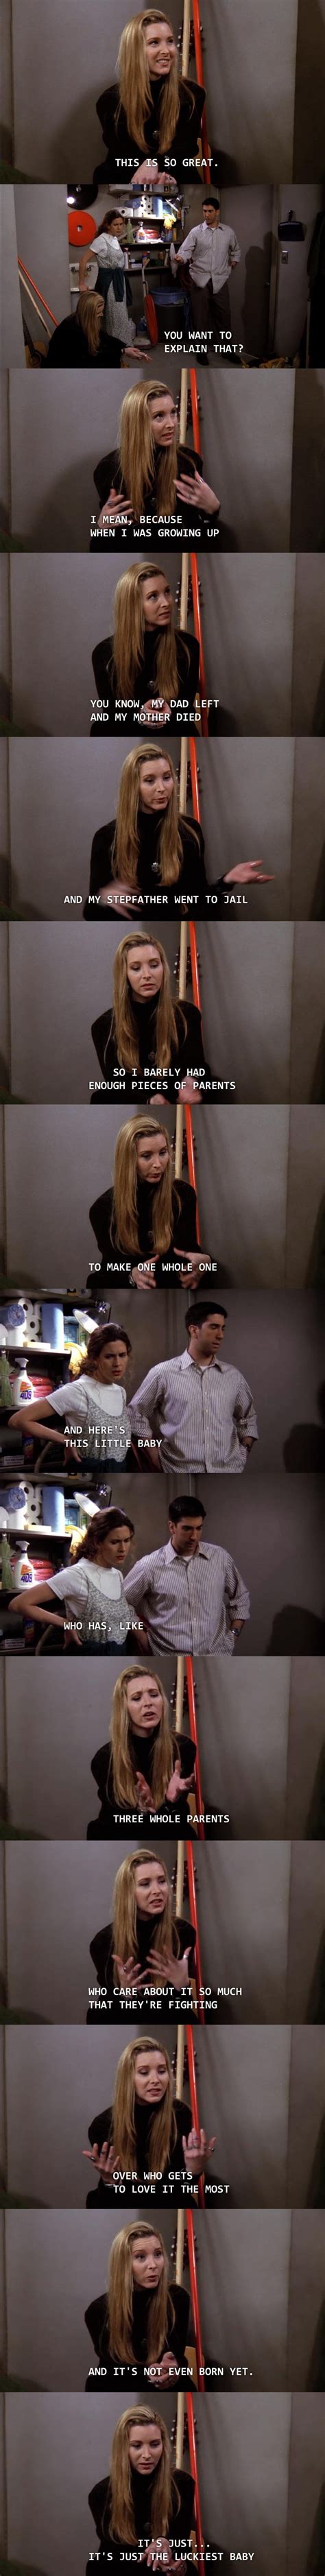 Never Seen Friends But Just Stumbled On This On Imgur And